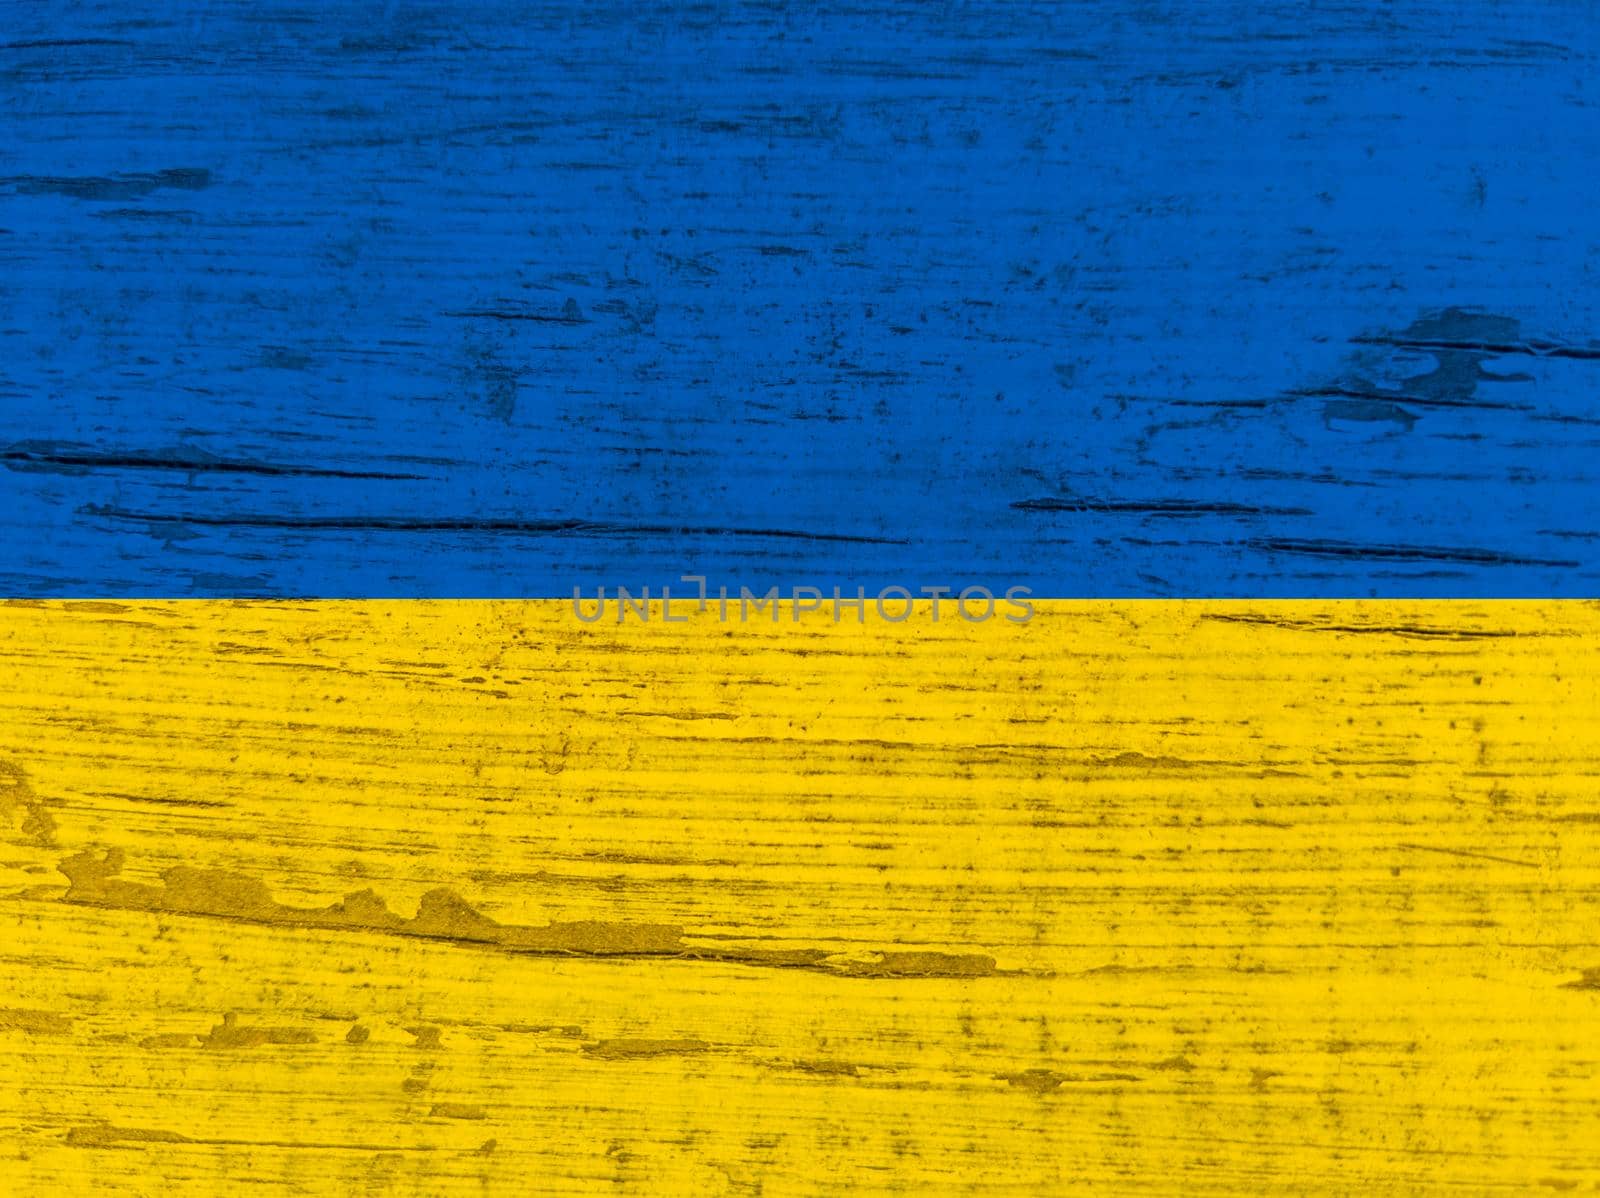 Ukrainian flag painted. Wrinkled blue and yellow colored grungy background